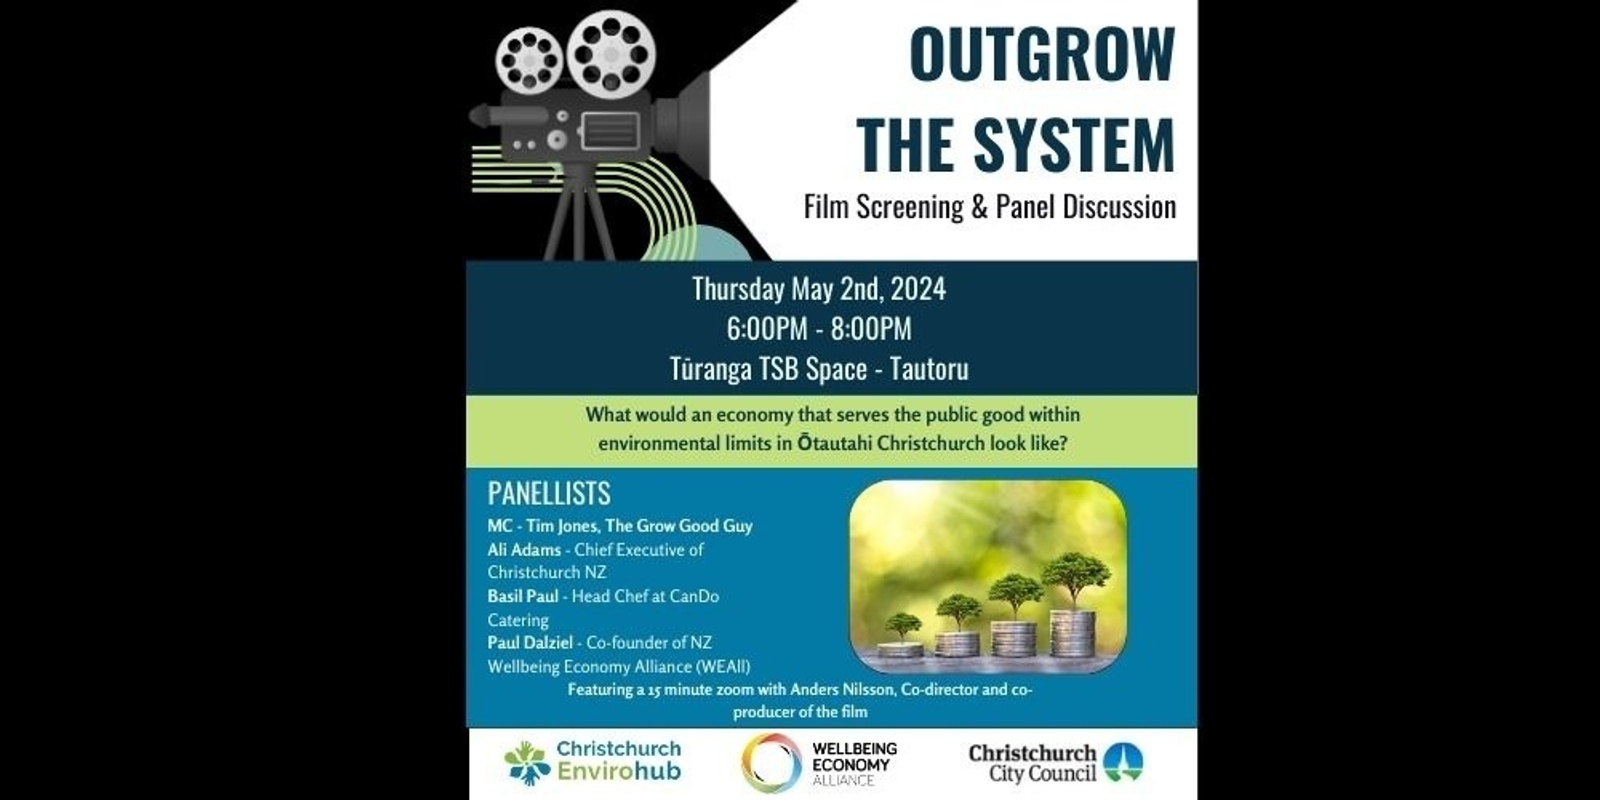 Banner image for Outgrow the System - Film Screening & Panel Discussion